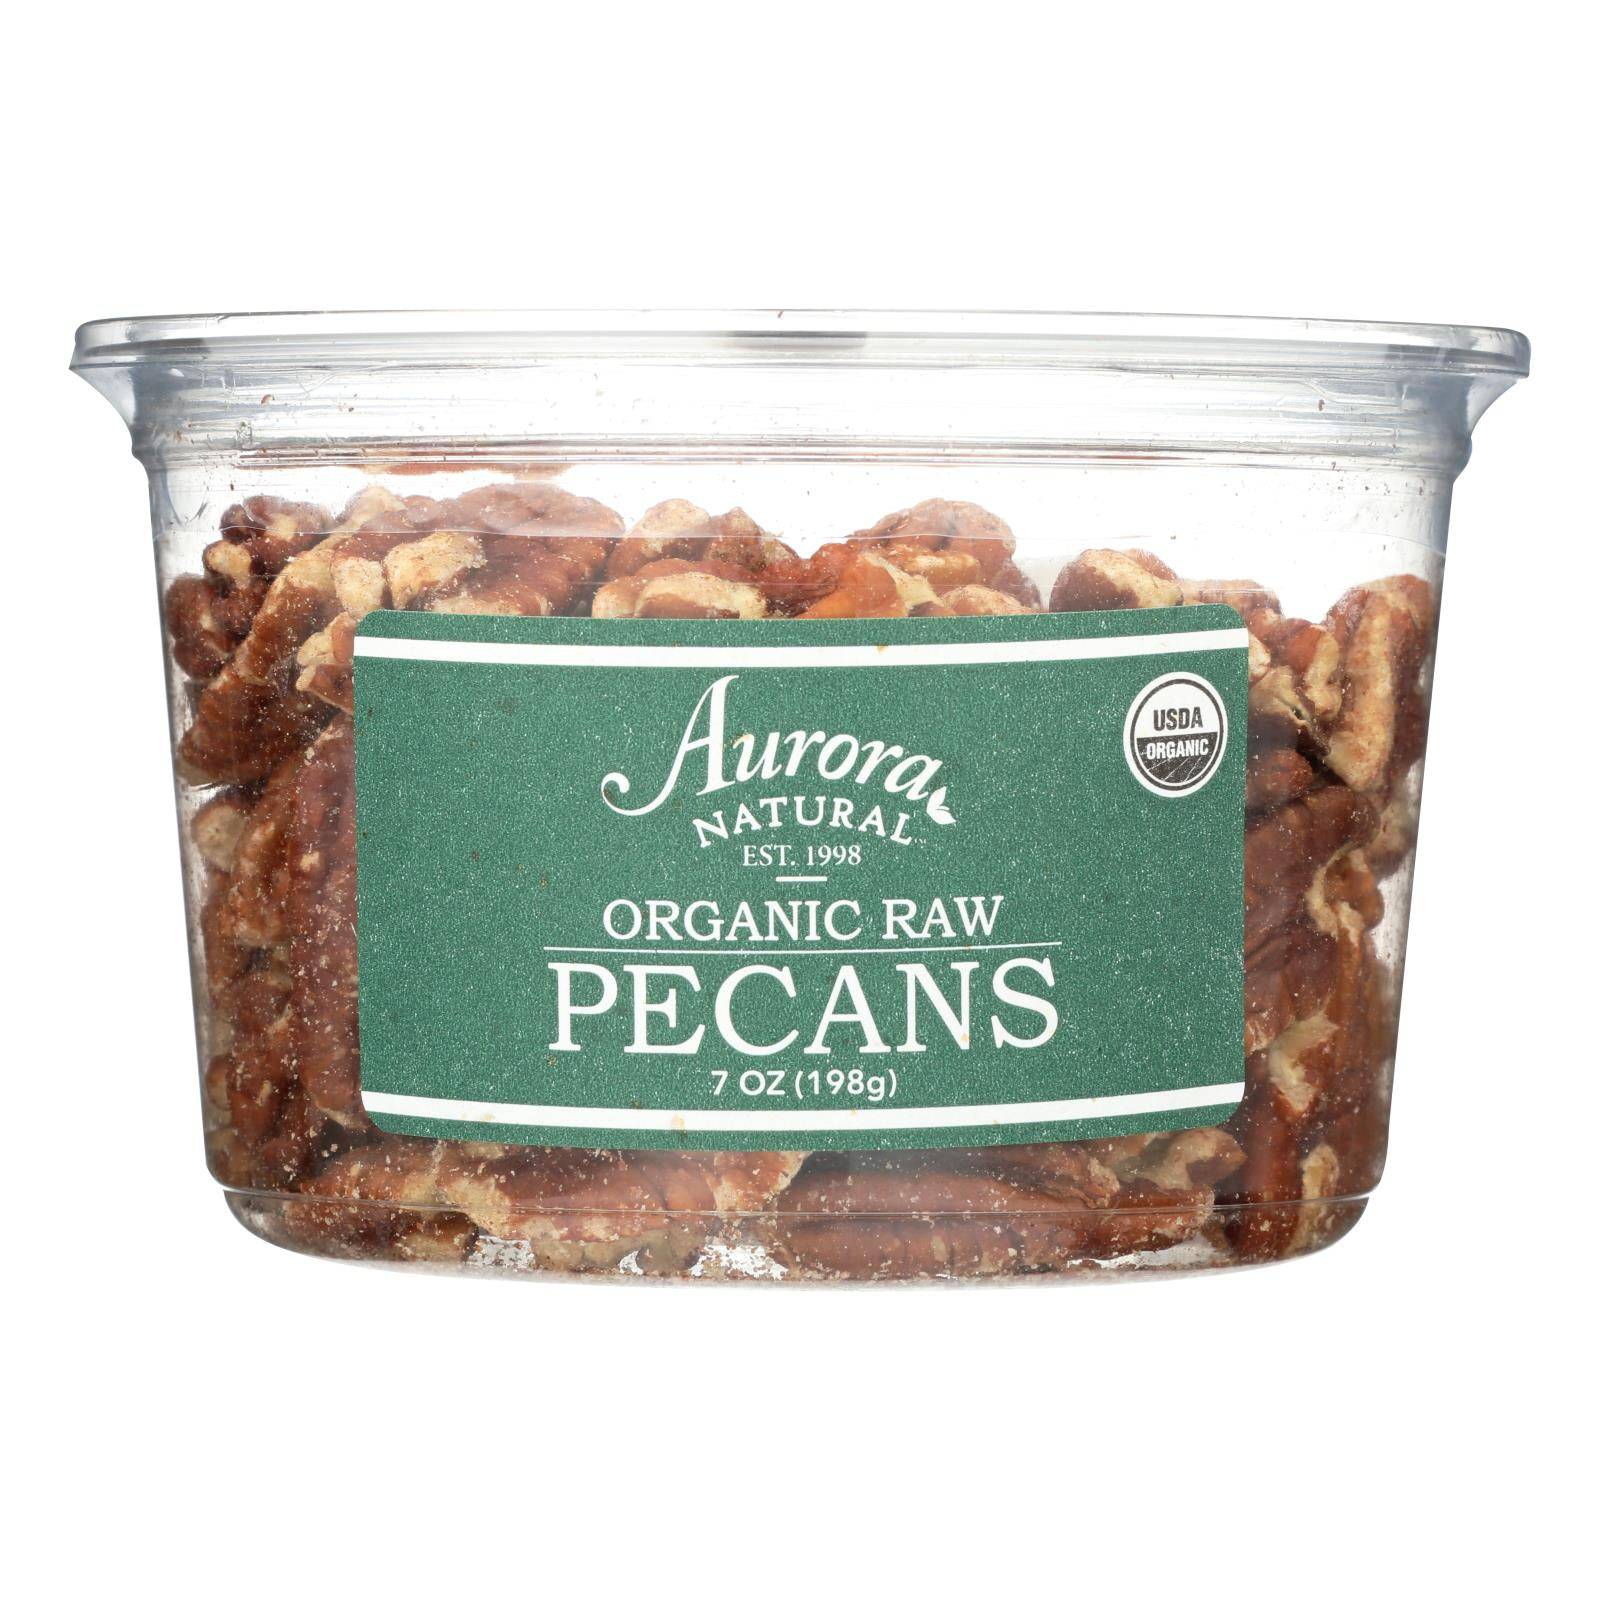 Aurora Natural Products - Organic Raw Pecans - Case Of 12 - 7 Oz. | OnlyNaturals.us